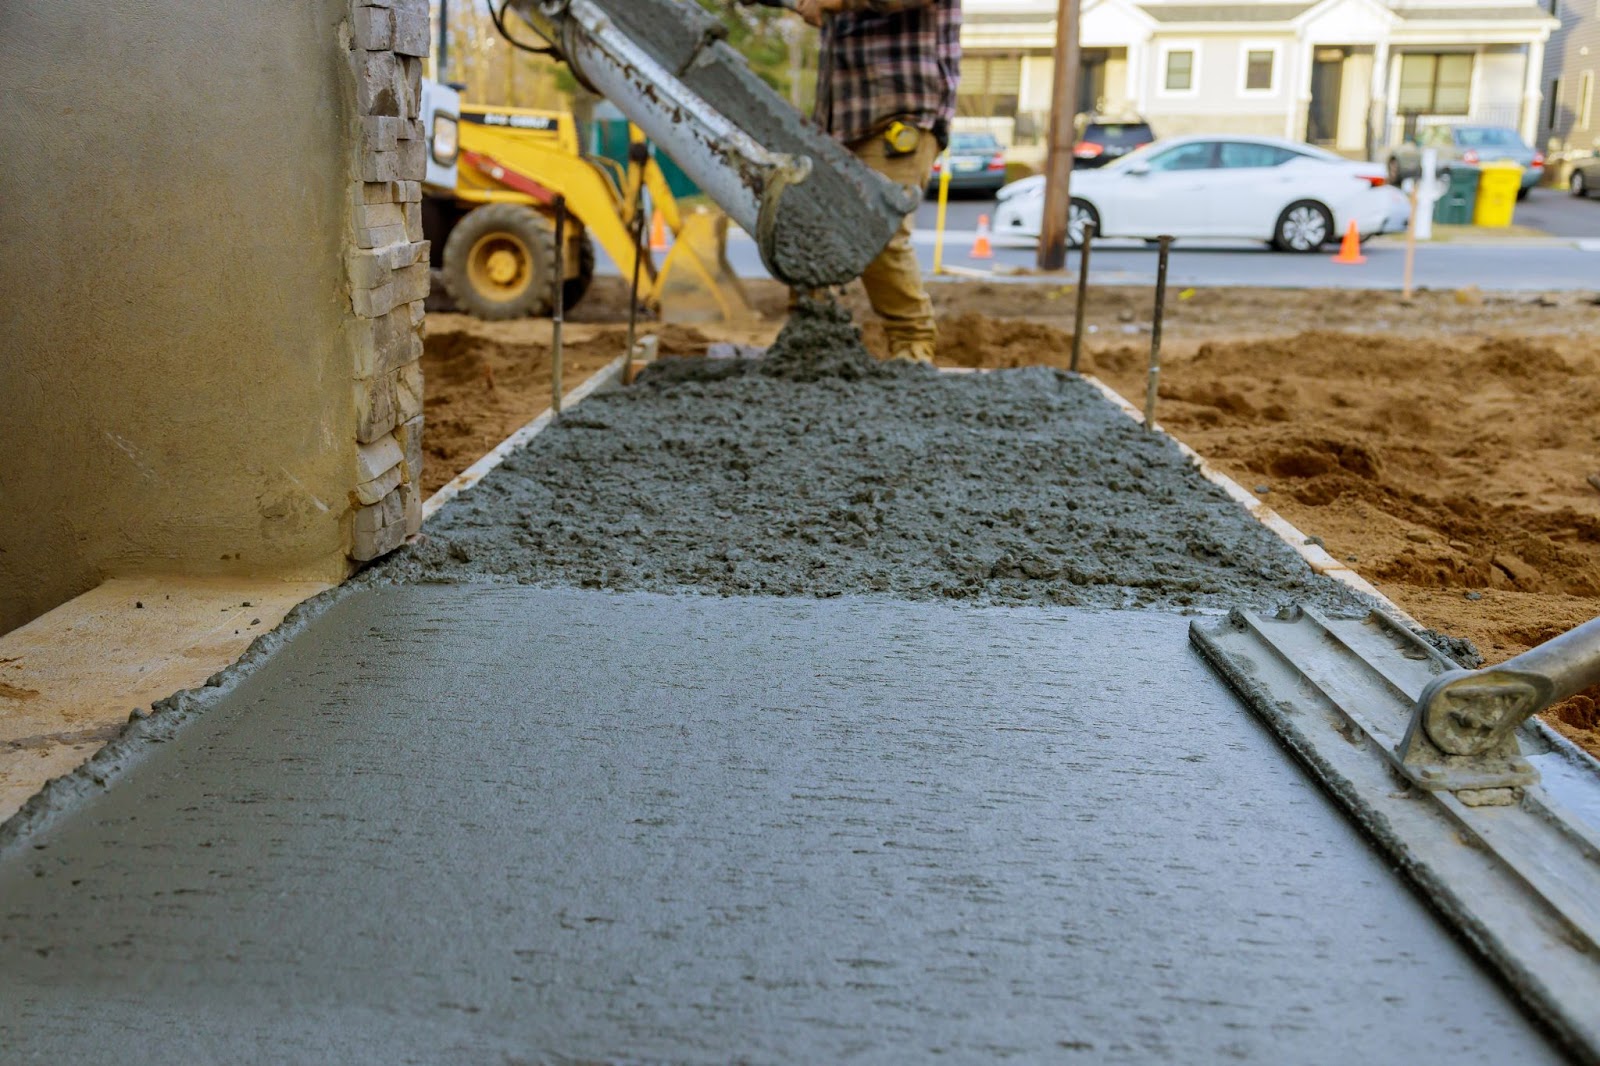 A close-up of a construction worker pouring reinforced concrete for the garage and sidewalk of a new home, with a white car and other vehicles parked in soft focus across the street.